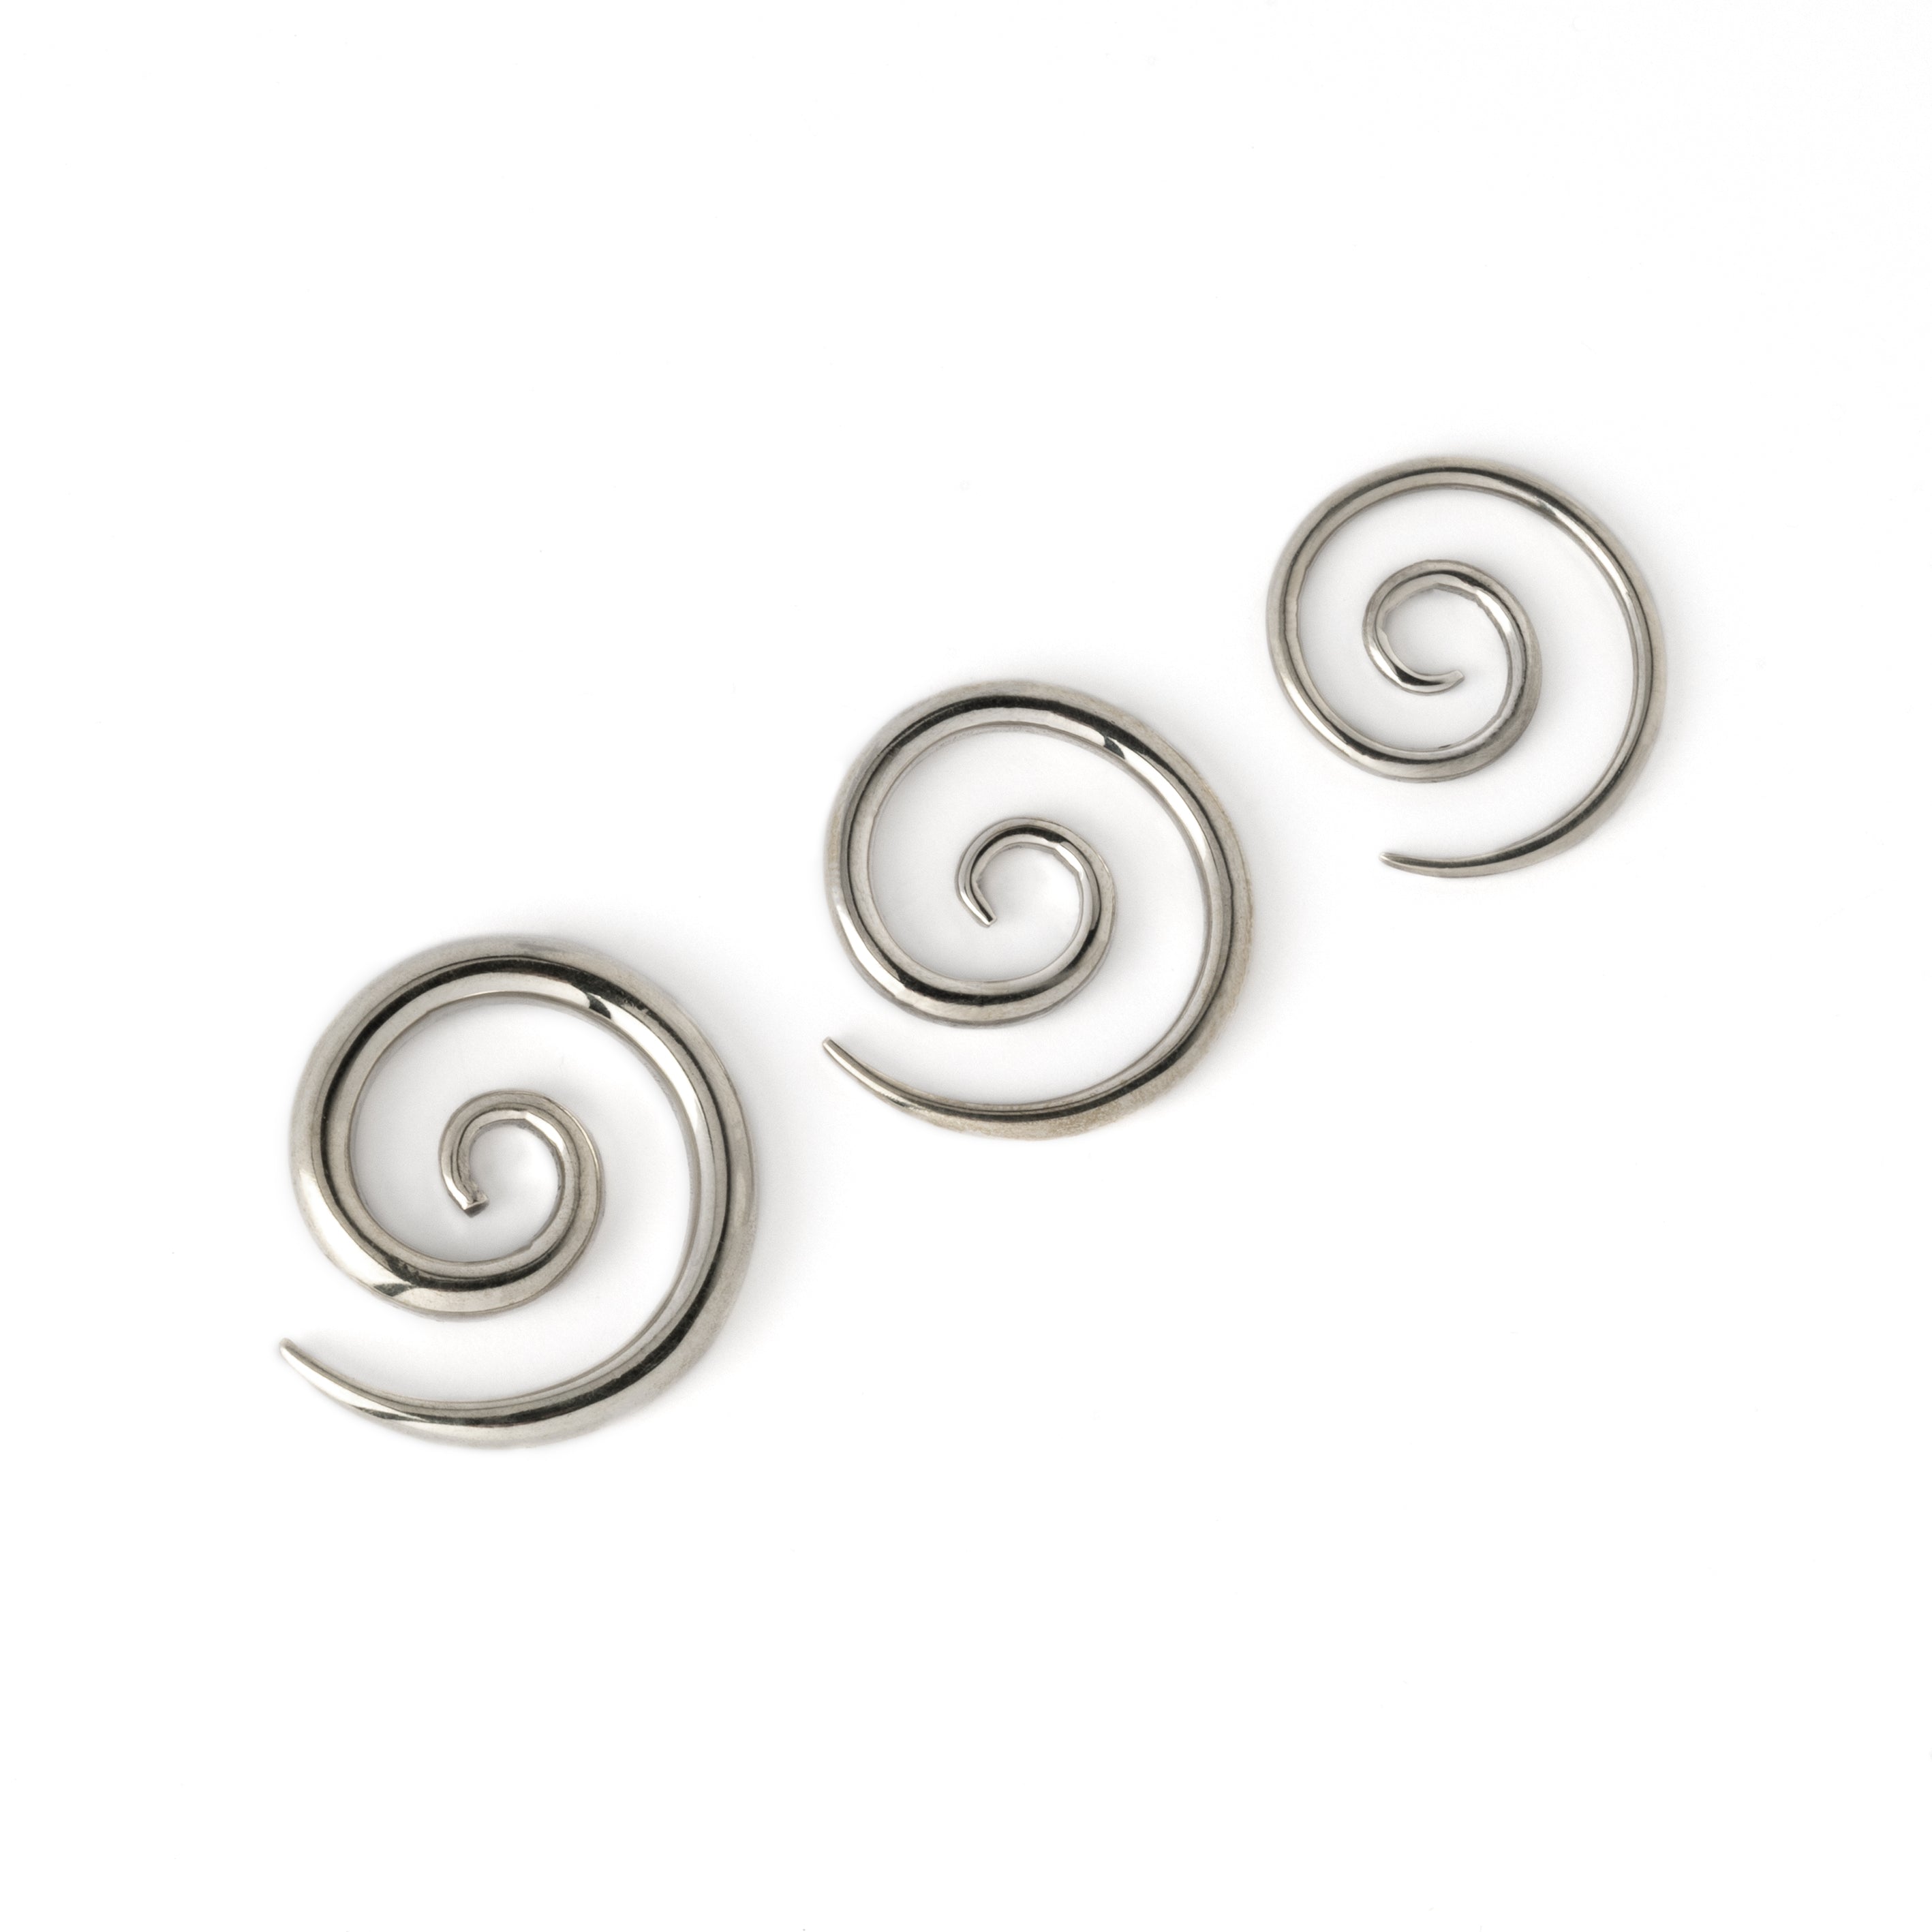 2mm, 3mm, 4mm silver spiral gauge earrings front and side view